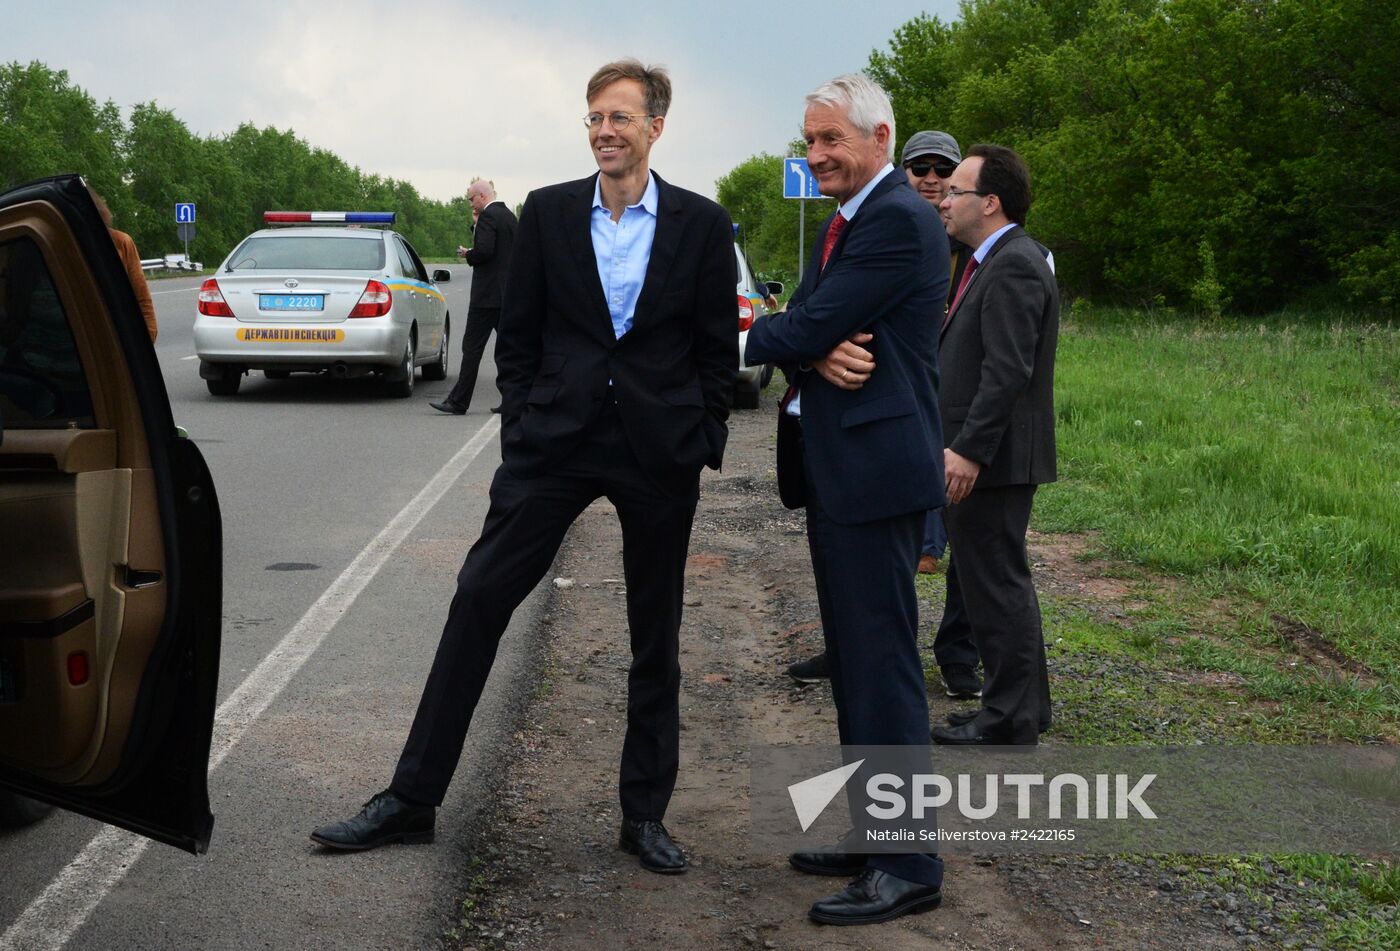 Released OSCE military inspectors arrive in Donetsk